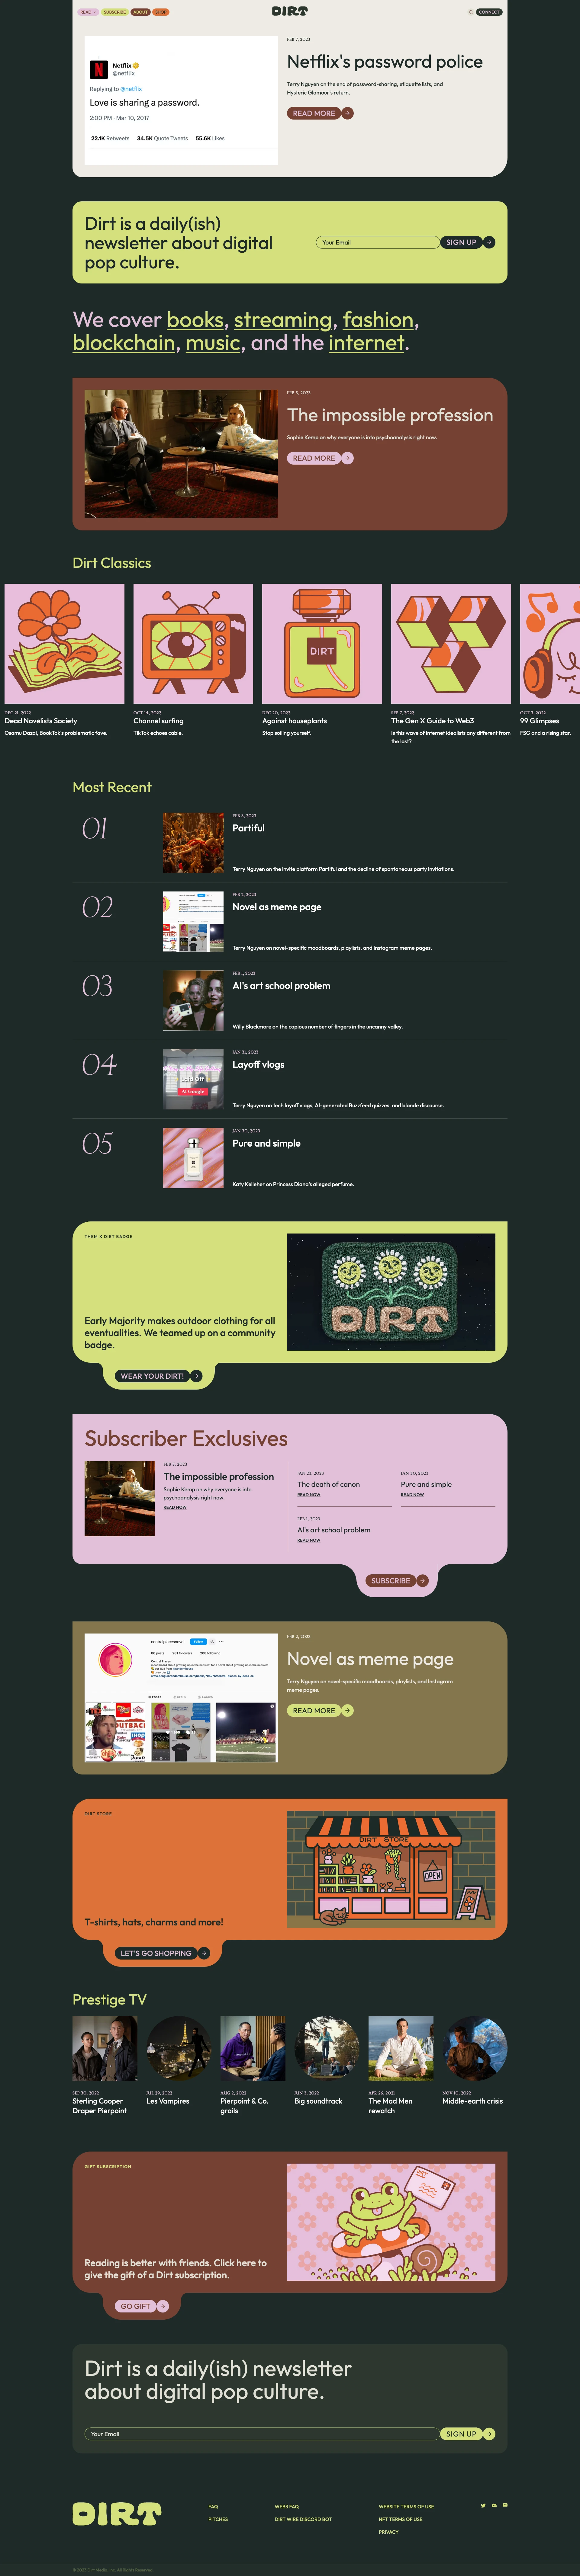 Dirt Landing Page Example: Dirt is a daily(ish) newsletter about the cutting edge of digital pop culture. Every week we send out multiple insightful short essays on topics like streaming, TikTok, video games, and web3, from a rotating group of critics.